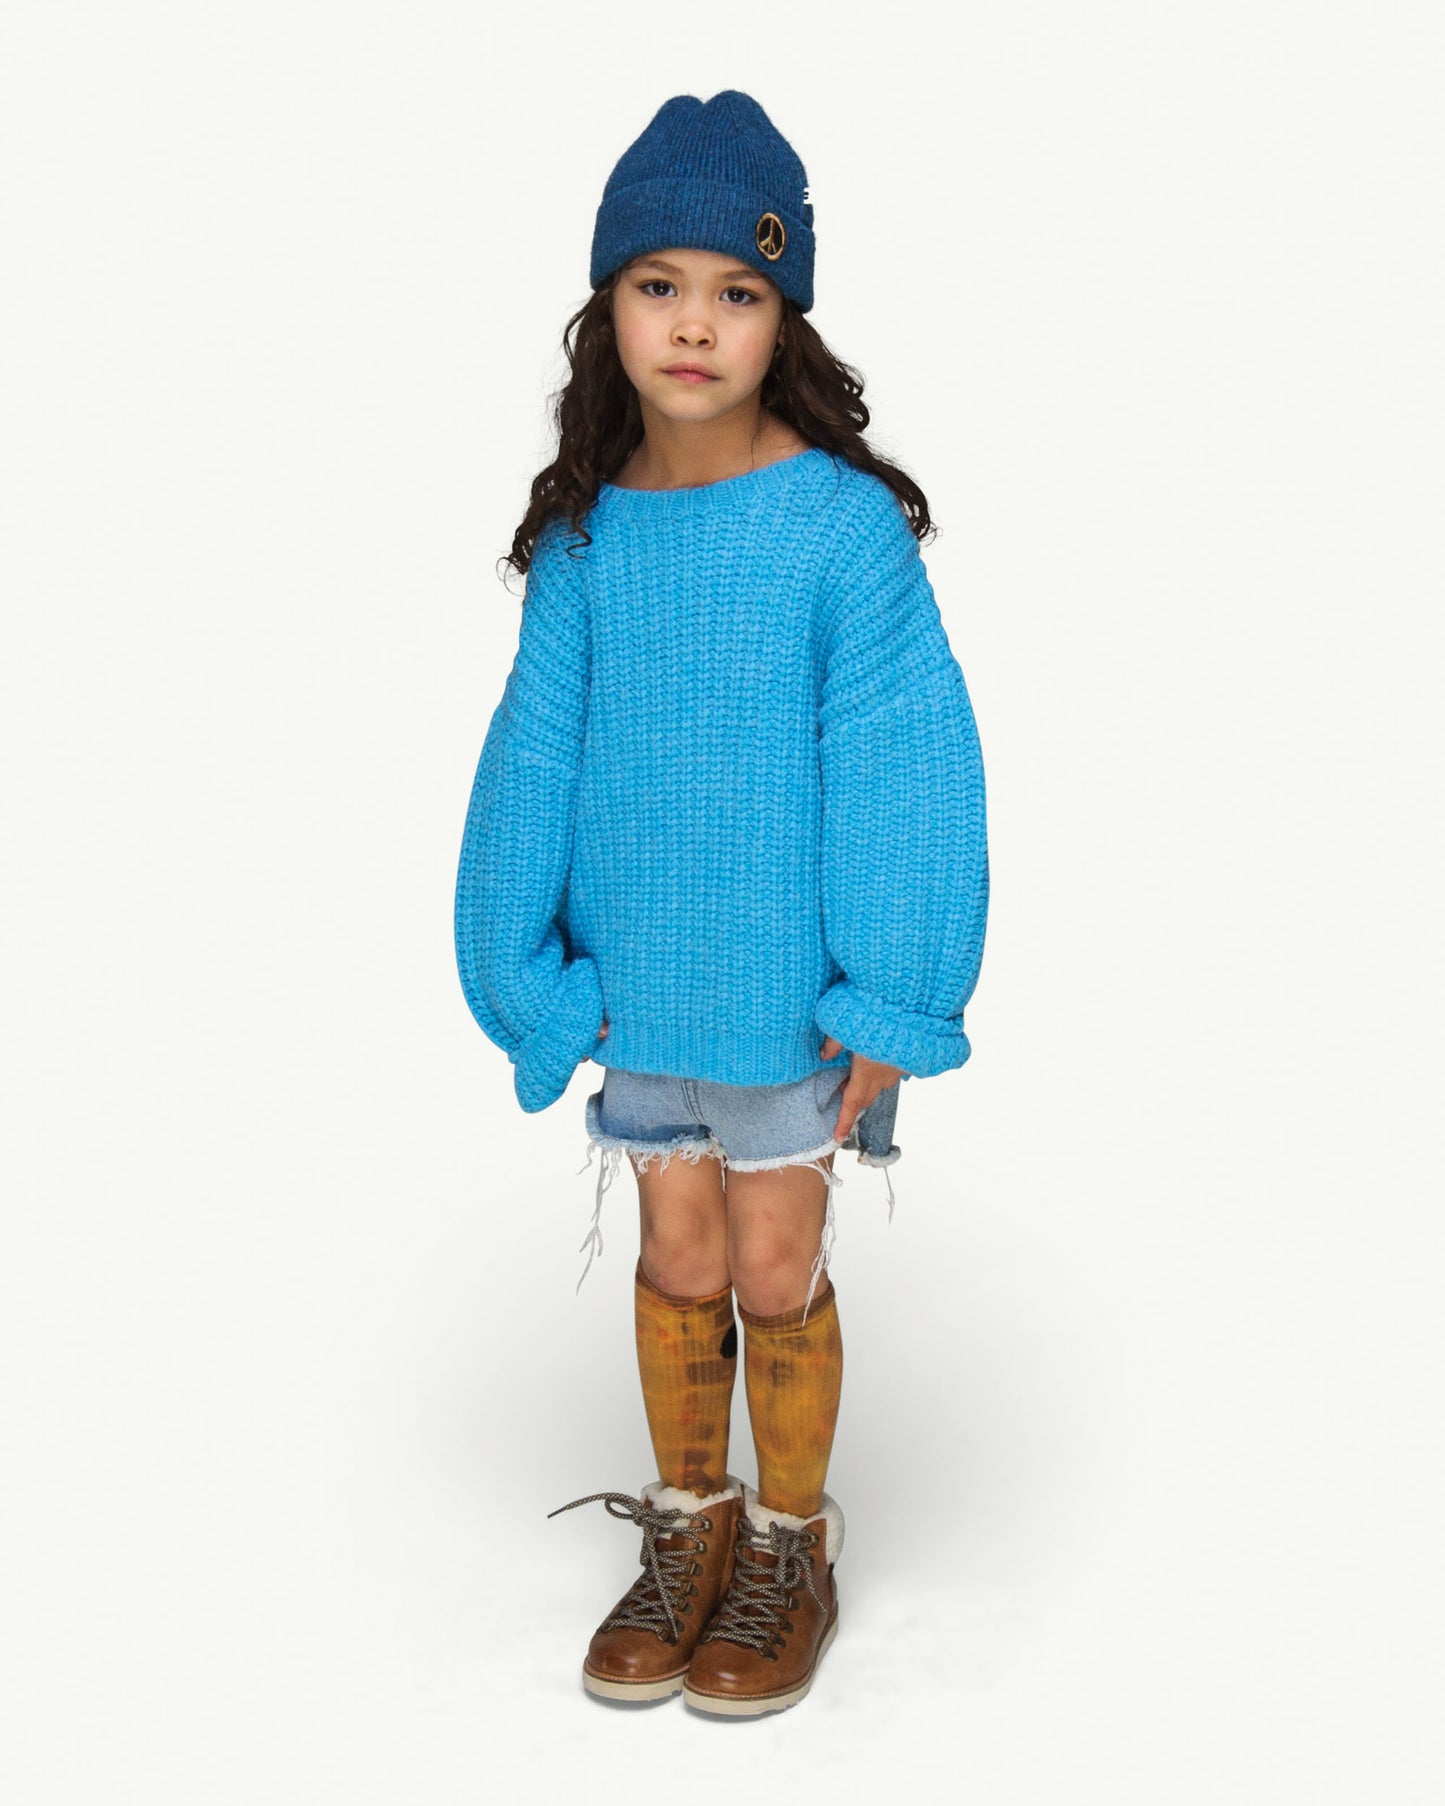 This picture shows a girl wearing a soft knitted blue beanie with a peace patch